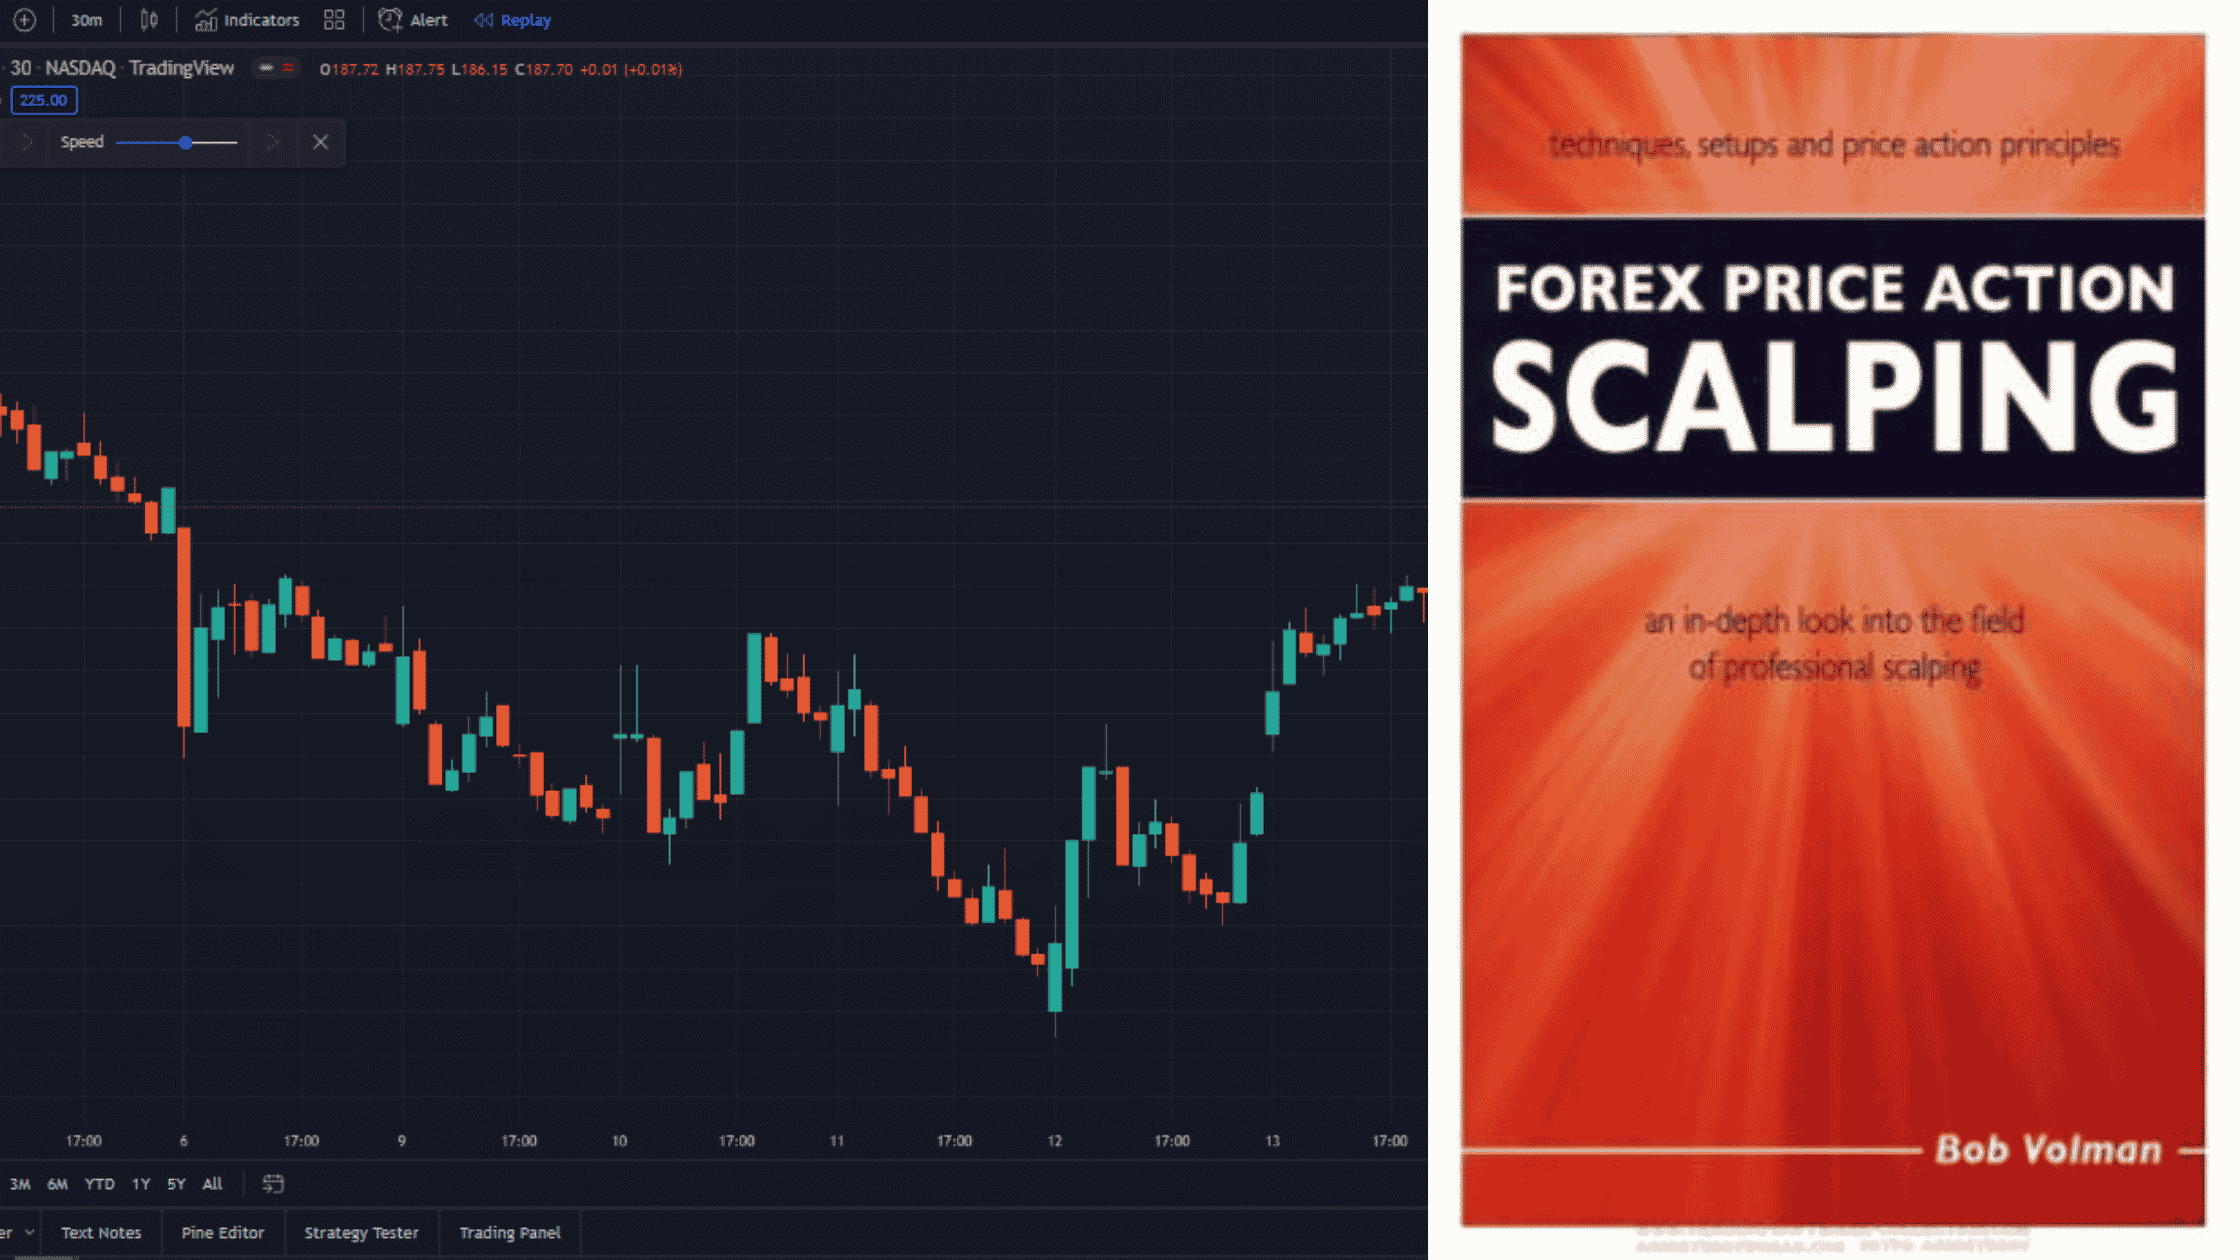 Forex Price Action Scalping an in-depth look into the field of professional scalping